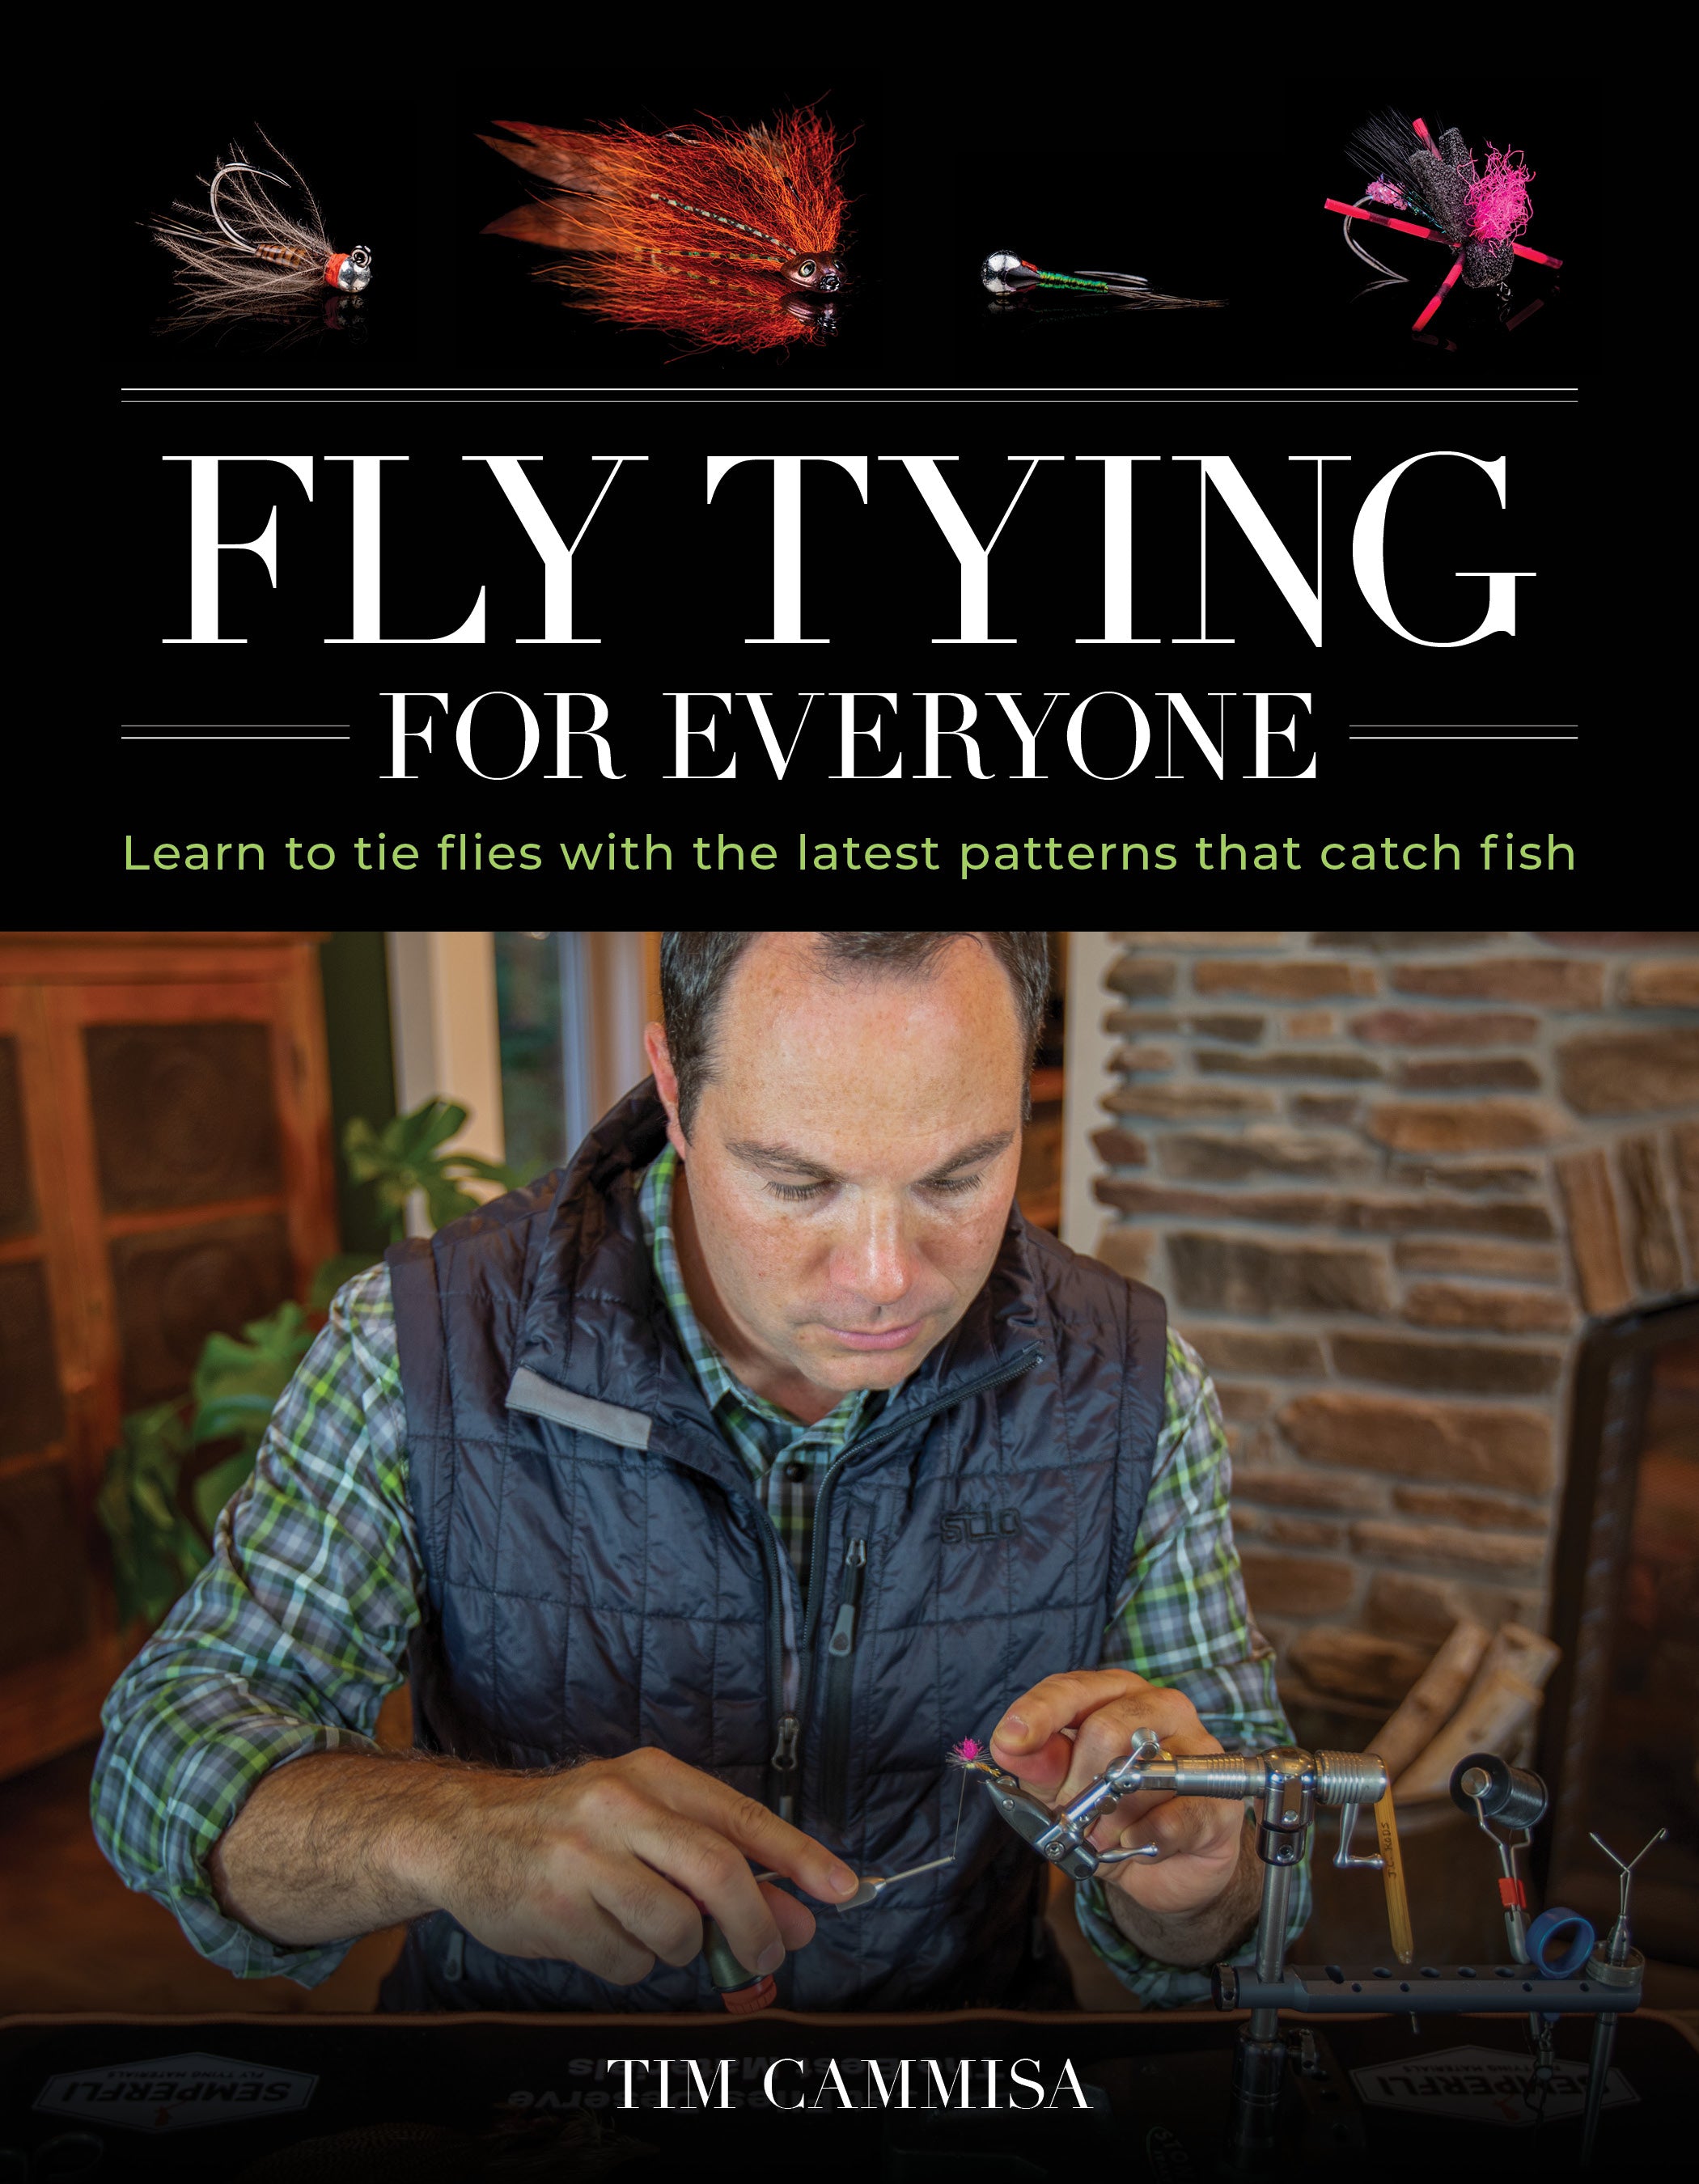 Fly Tying For Everyone by Tim Cammisa